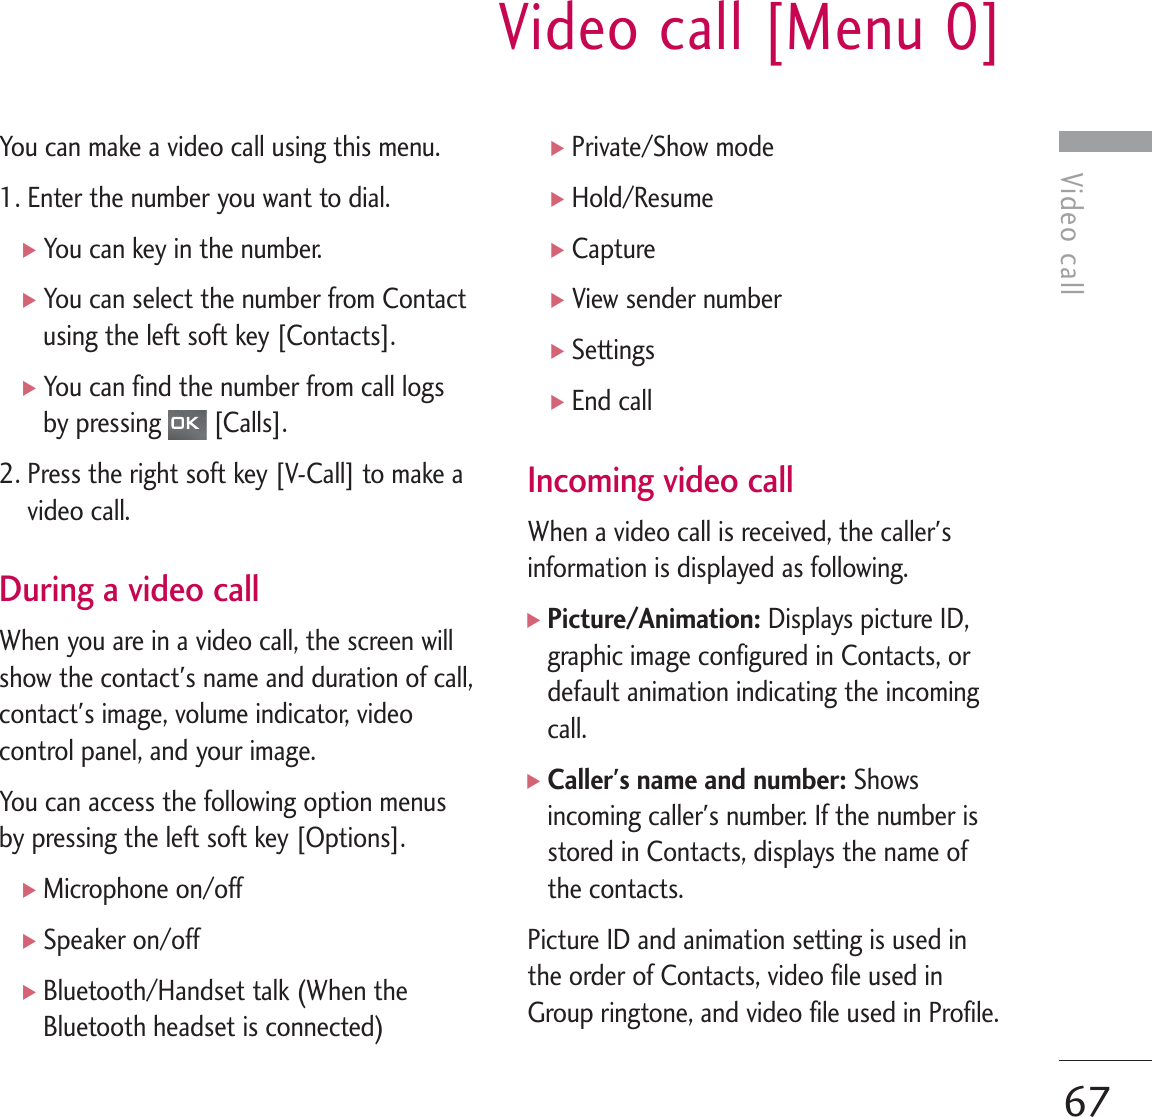 Video callVideo call [Menu 0]67You can make a video call using this menu. 1. Enter the number you want to dial.]You can key in the number.]You can select the number from Contactusing the left soft key [Contacts]. ]You can find the number from call logsby pressing  [Calls].2. Press the right soft key [V-Call] to make avideo call.During a video callWhen you are in a video call, the screen willshow the contact&apos;s name and duration of call,contact&apos;s image, volume indicator, videocontrol panel, and your image.You can access the following option menusby pressing the left soft key [Options].]Microphone on/off]Speaker on/off]Bluetooth/Handset talk (When theBluetooth headset is connected)]Private/Show mode]Hold/Resume]Capture]View sender number]Settings]End callIncoming video callWhen a video call is received, the caller&apos;sinformation is displayed as following.]Picture/Animation: Displays picture ID,graphic image configured in Contacts, ordefault animation indicating the incomingcall.]Caller&apos;s name and number: Showsincoming caller&apos;s number. If the number isstored in Contacts, displays the name ofthe contacts.Picture ID and animation setting is used inthe order of Contacts, video file used inGroup ringtone, and video file used in Profile.